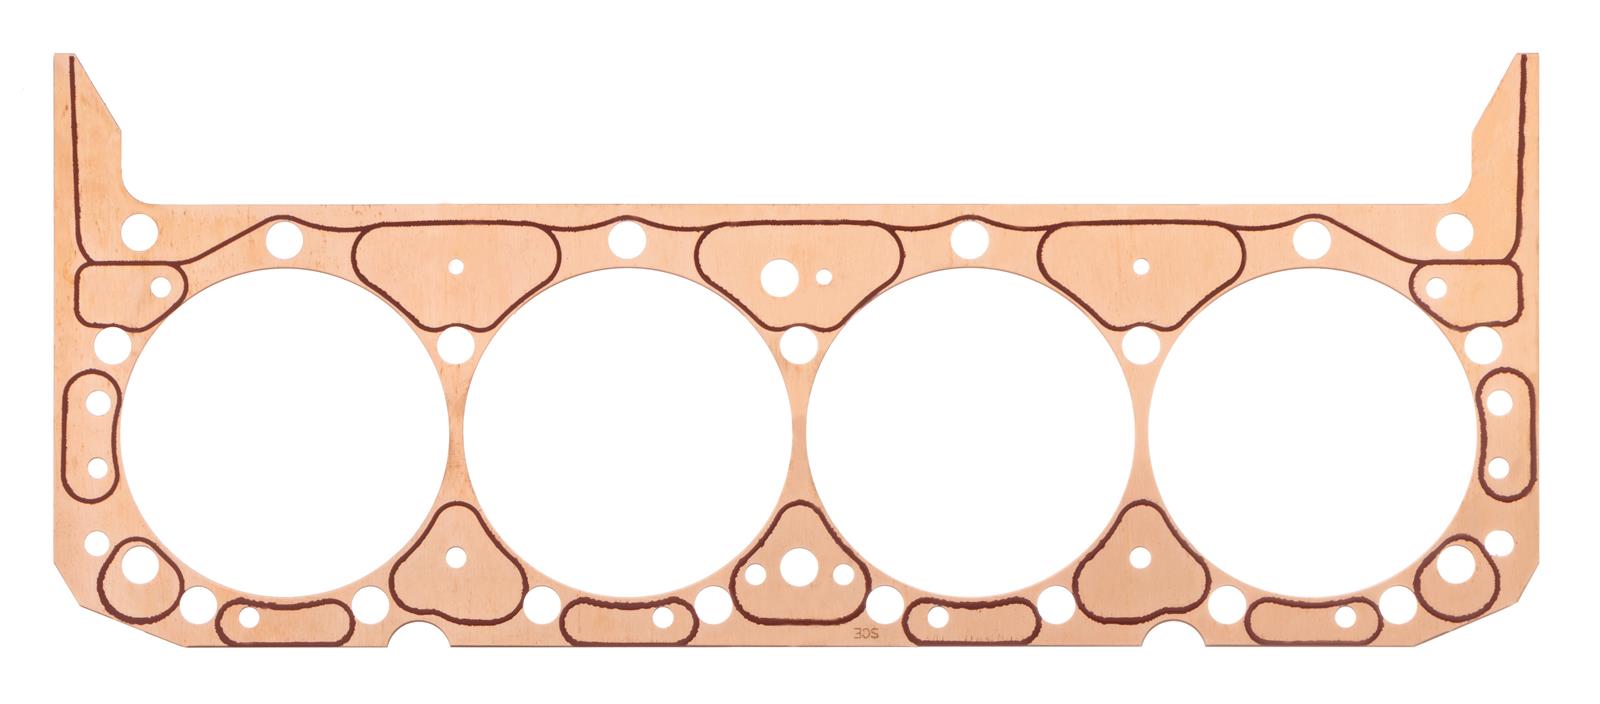 SCE Gaskets Cylinder Head Gasket, Pro Copper, 4.200 in Bore, 0.050 in Compression Thickness, Copper, Small Block Chevy, Each - 3